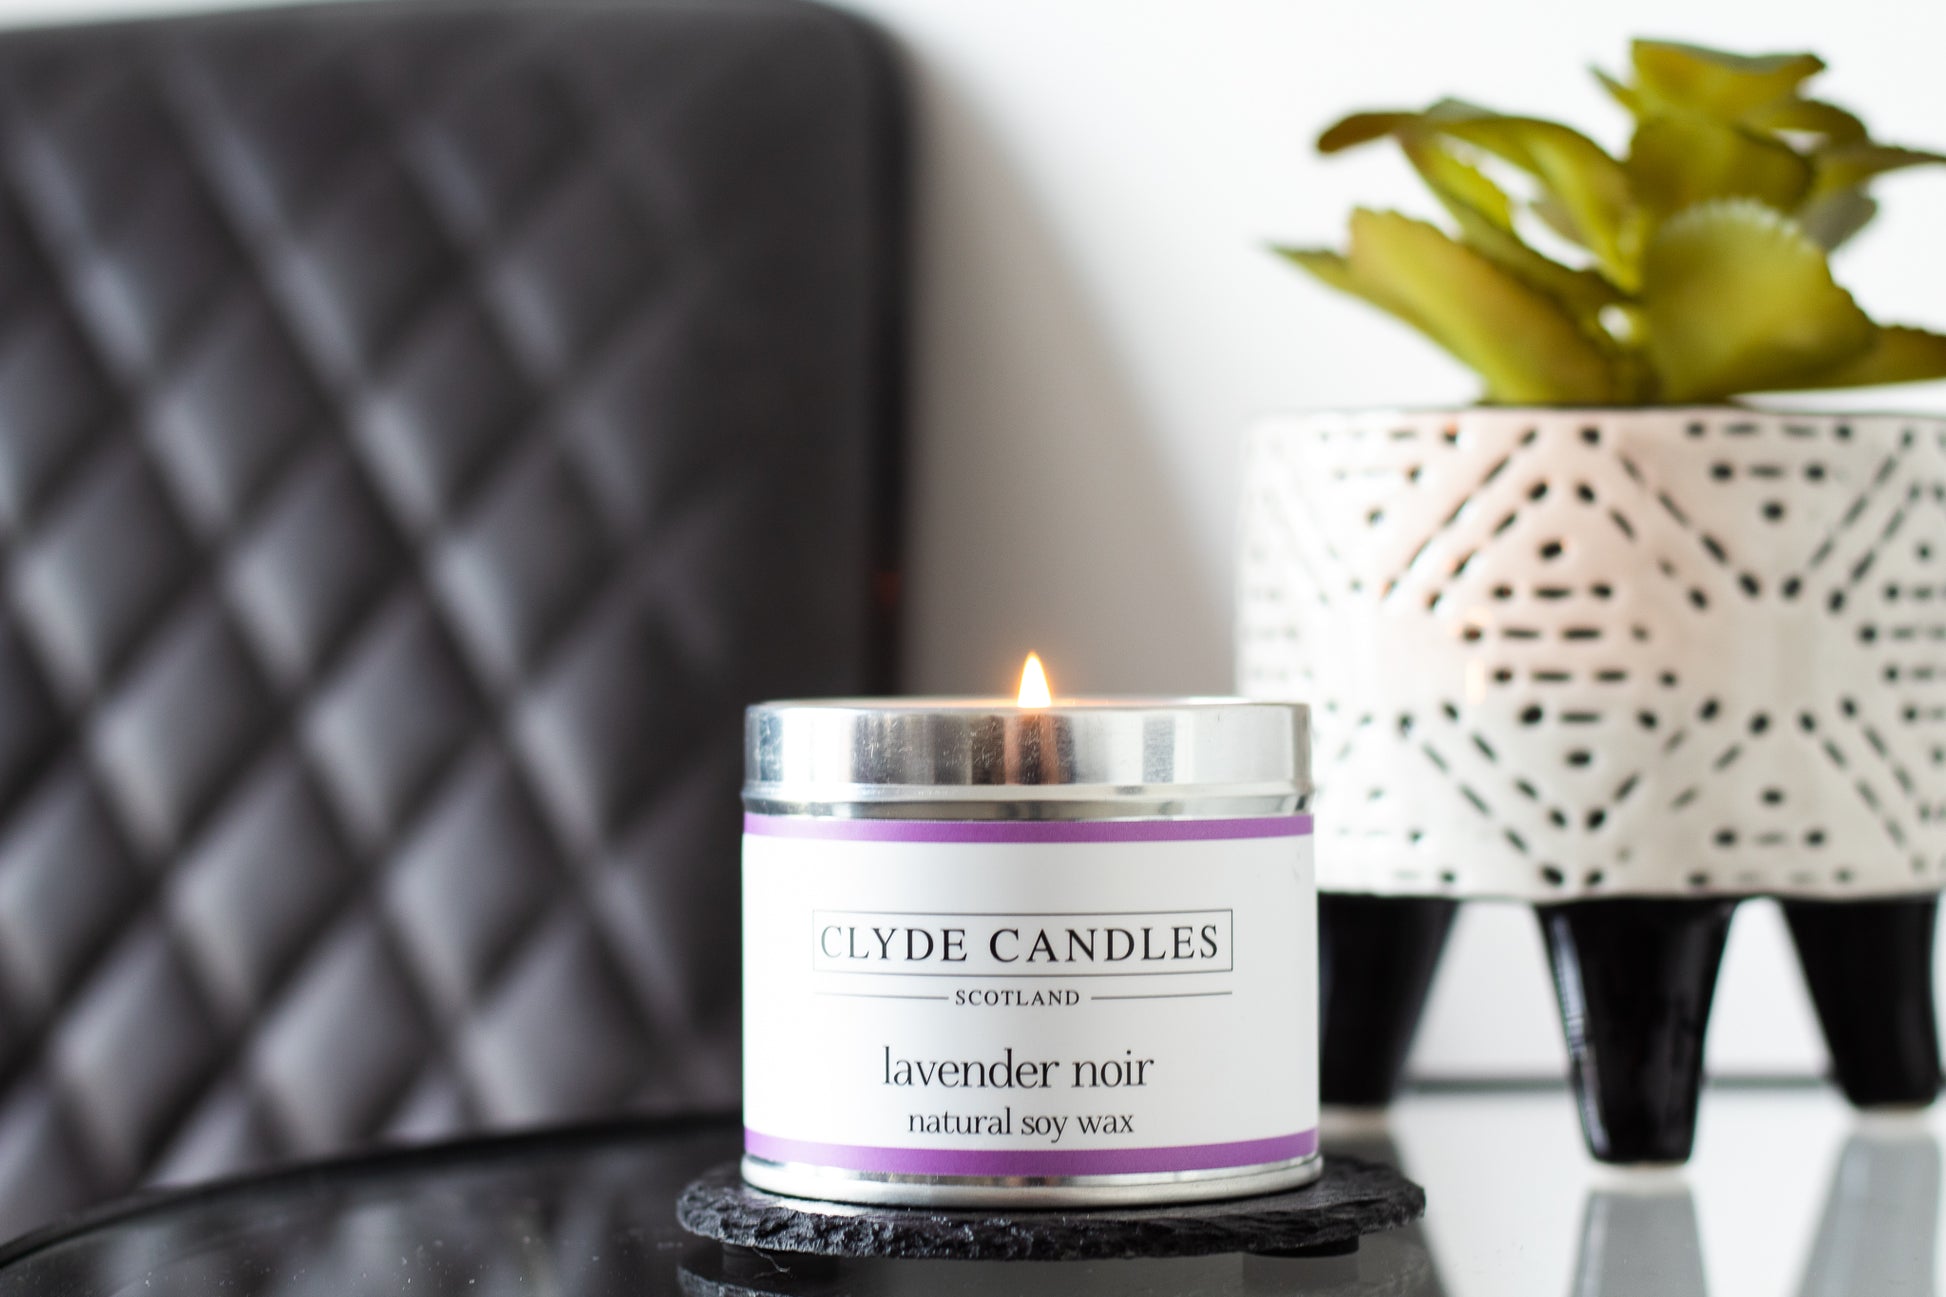 Lavender Noir Candle Tin Natural Soy wax, Scottish Candles, Clyde Candles